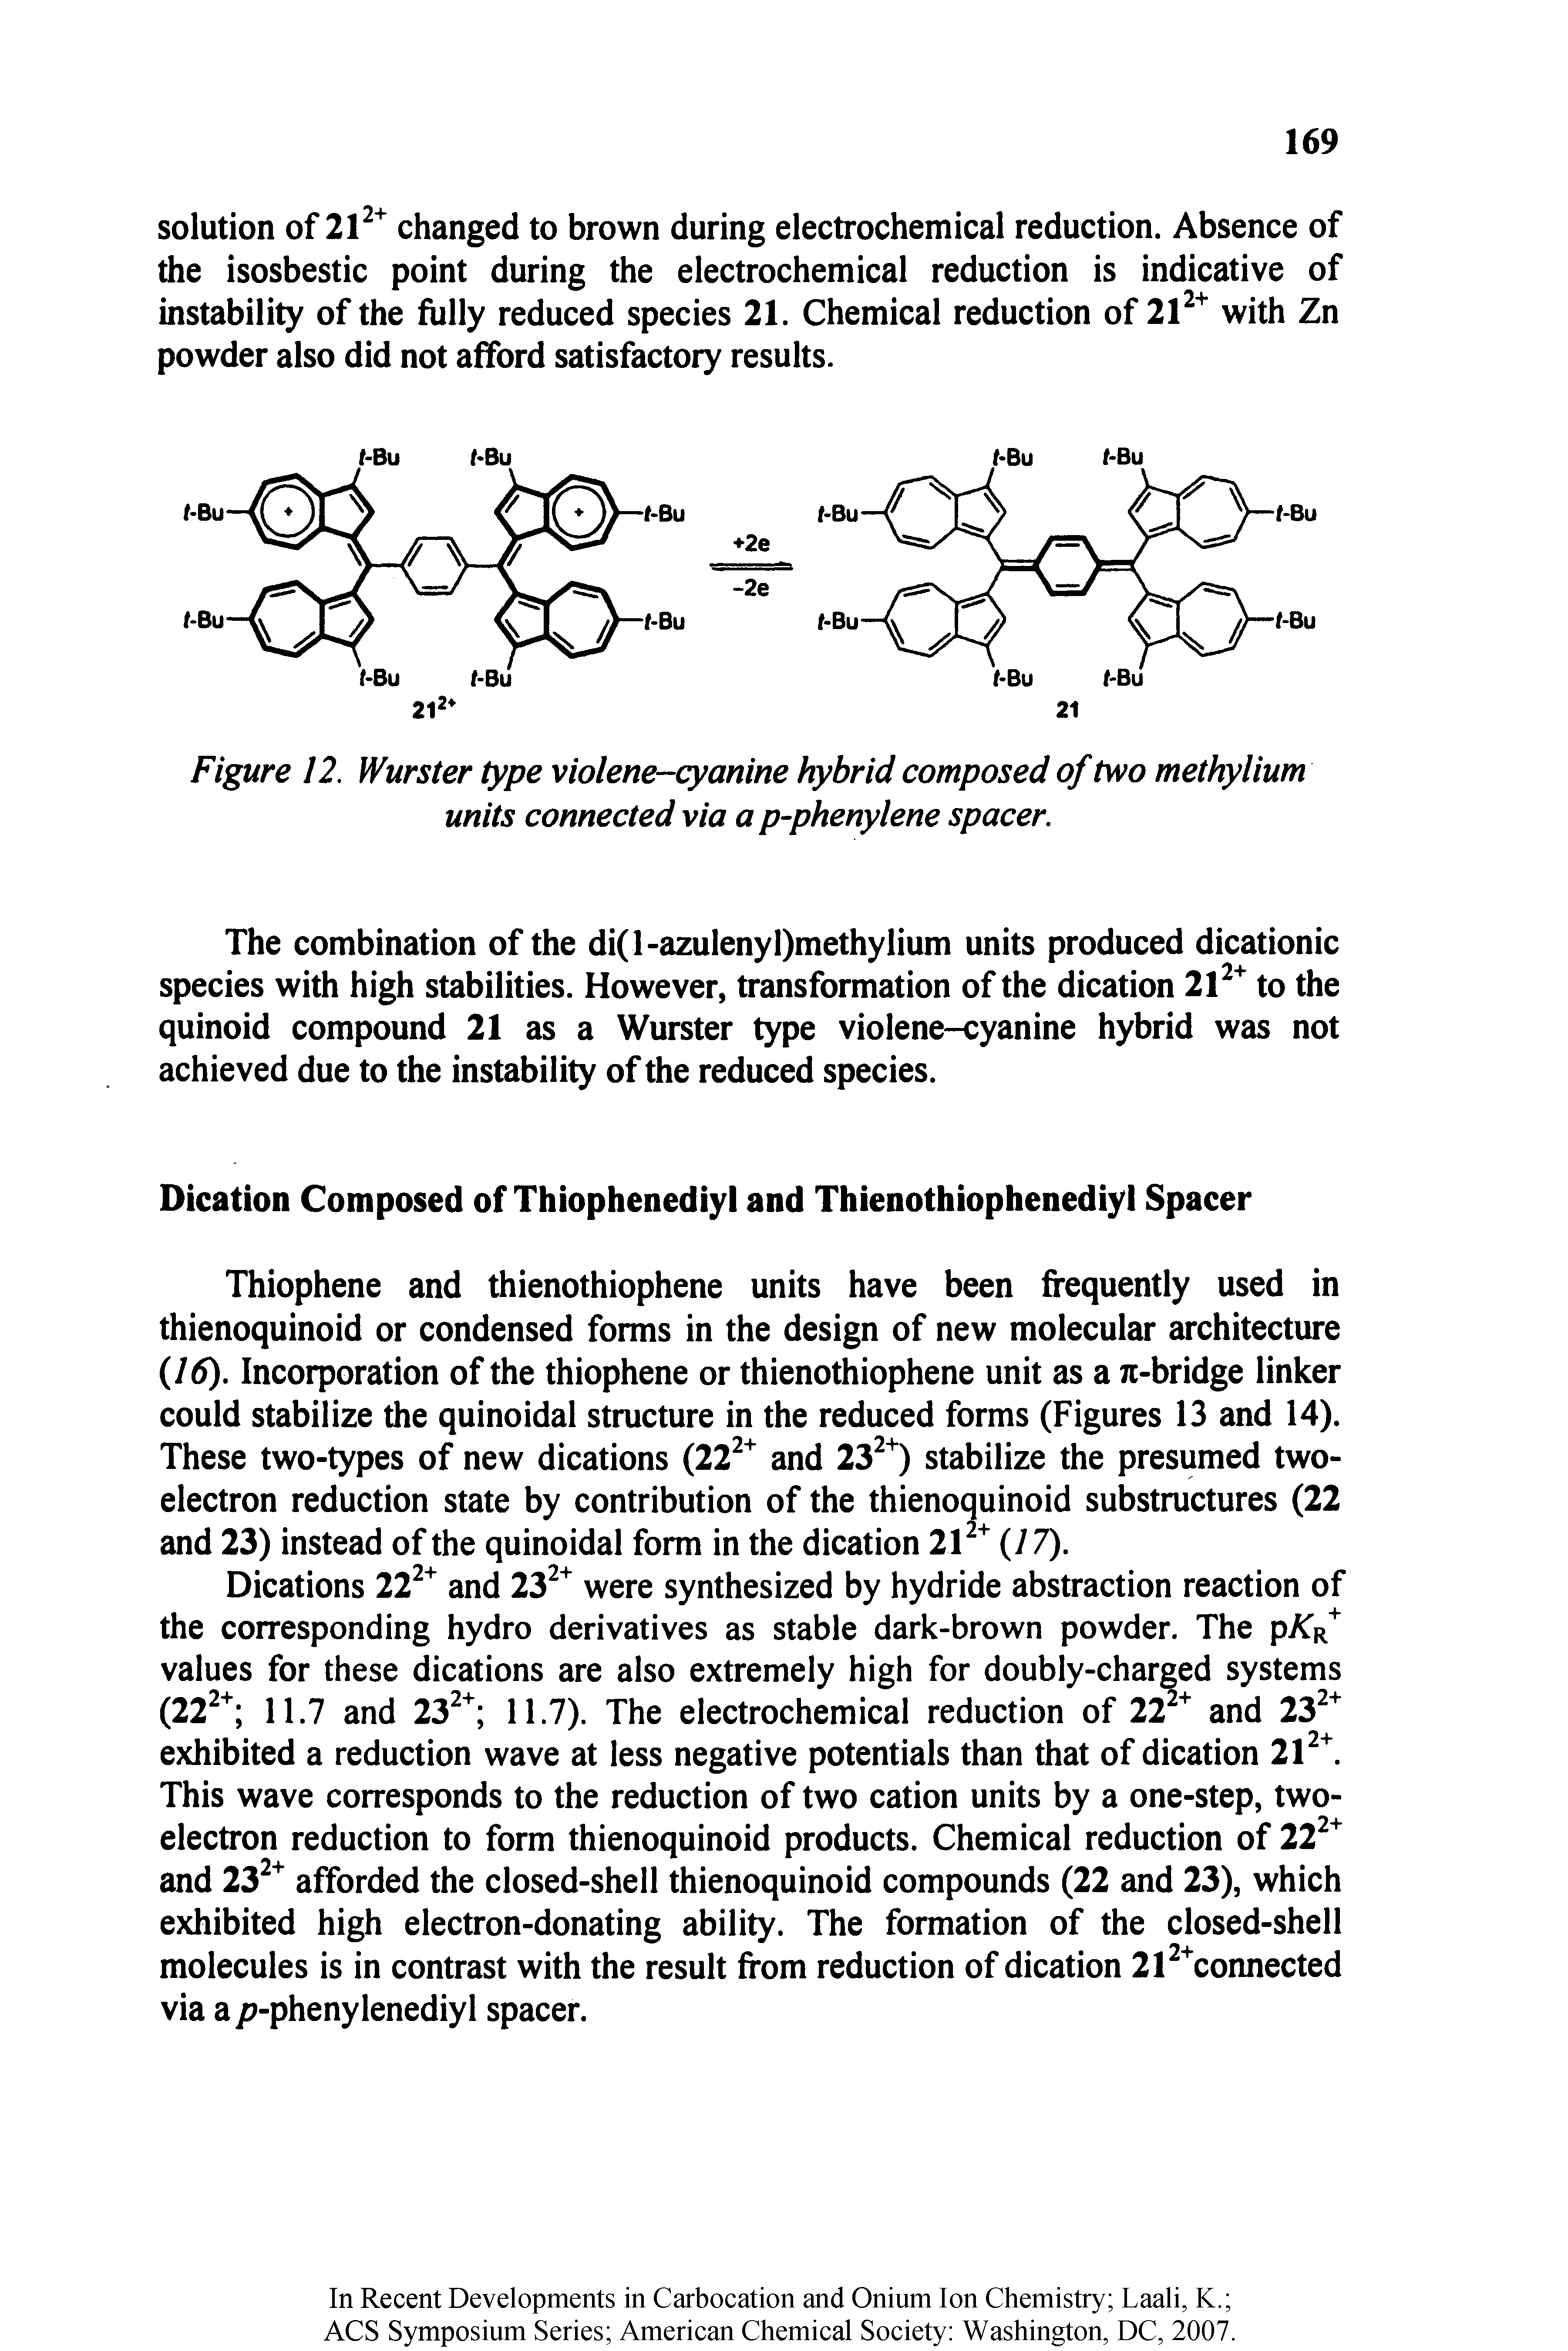 Figure 12. Wurster type violene-cyanine hybrid composed of two methylium units connected via a p-phenylene spacer.